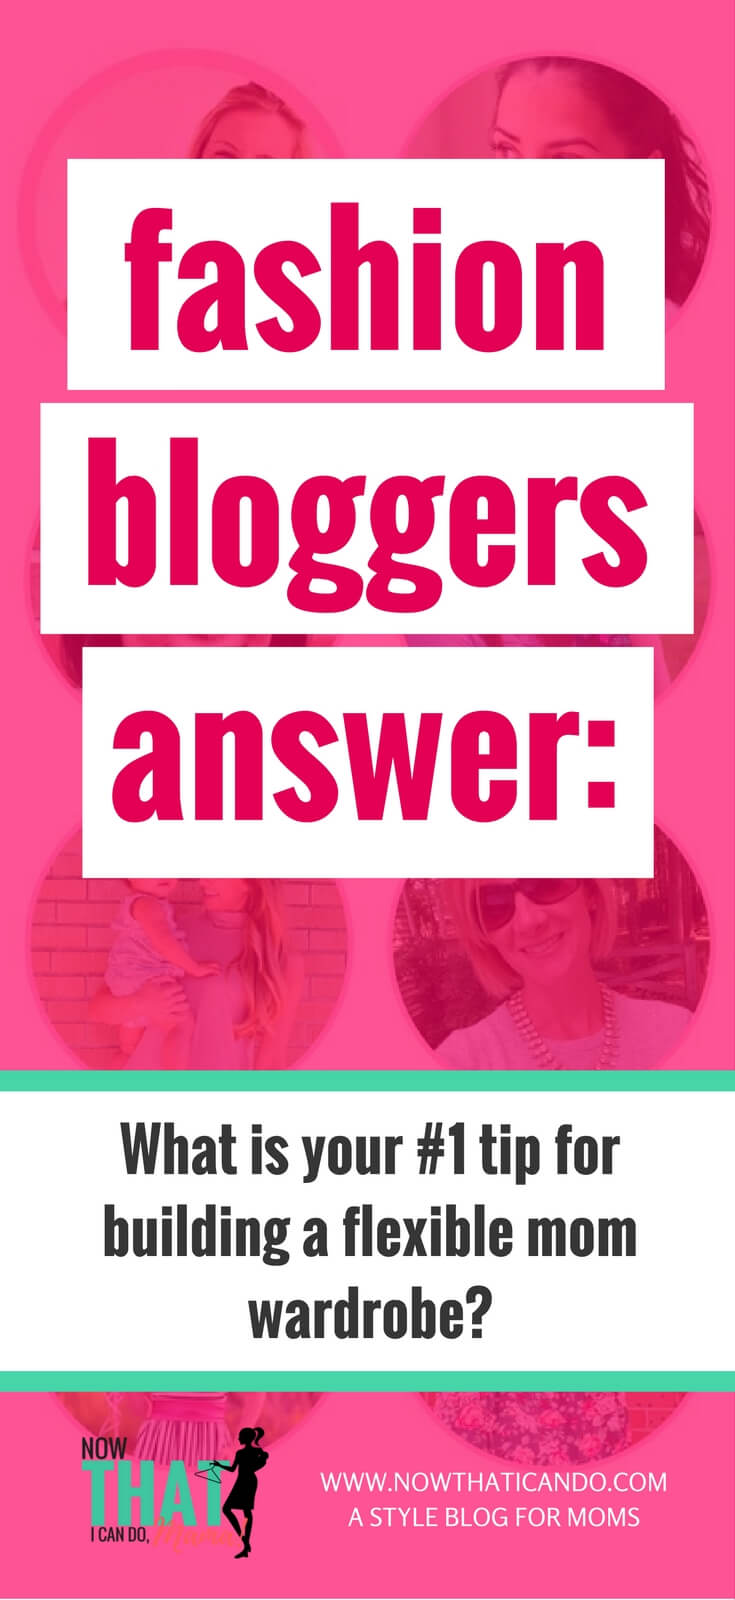 Awesome tips from the best! Check out what these mom bloggers had to say. I definitely want to apply some of these tips!